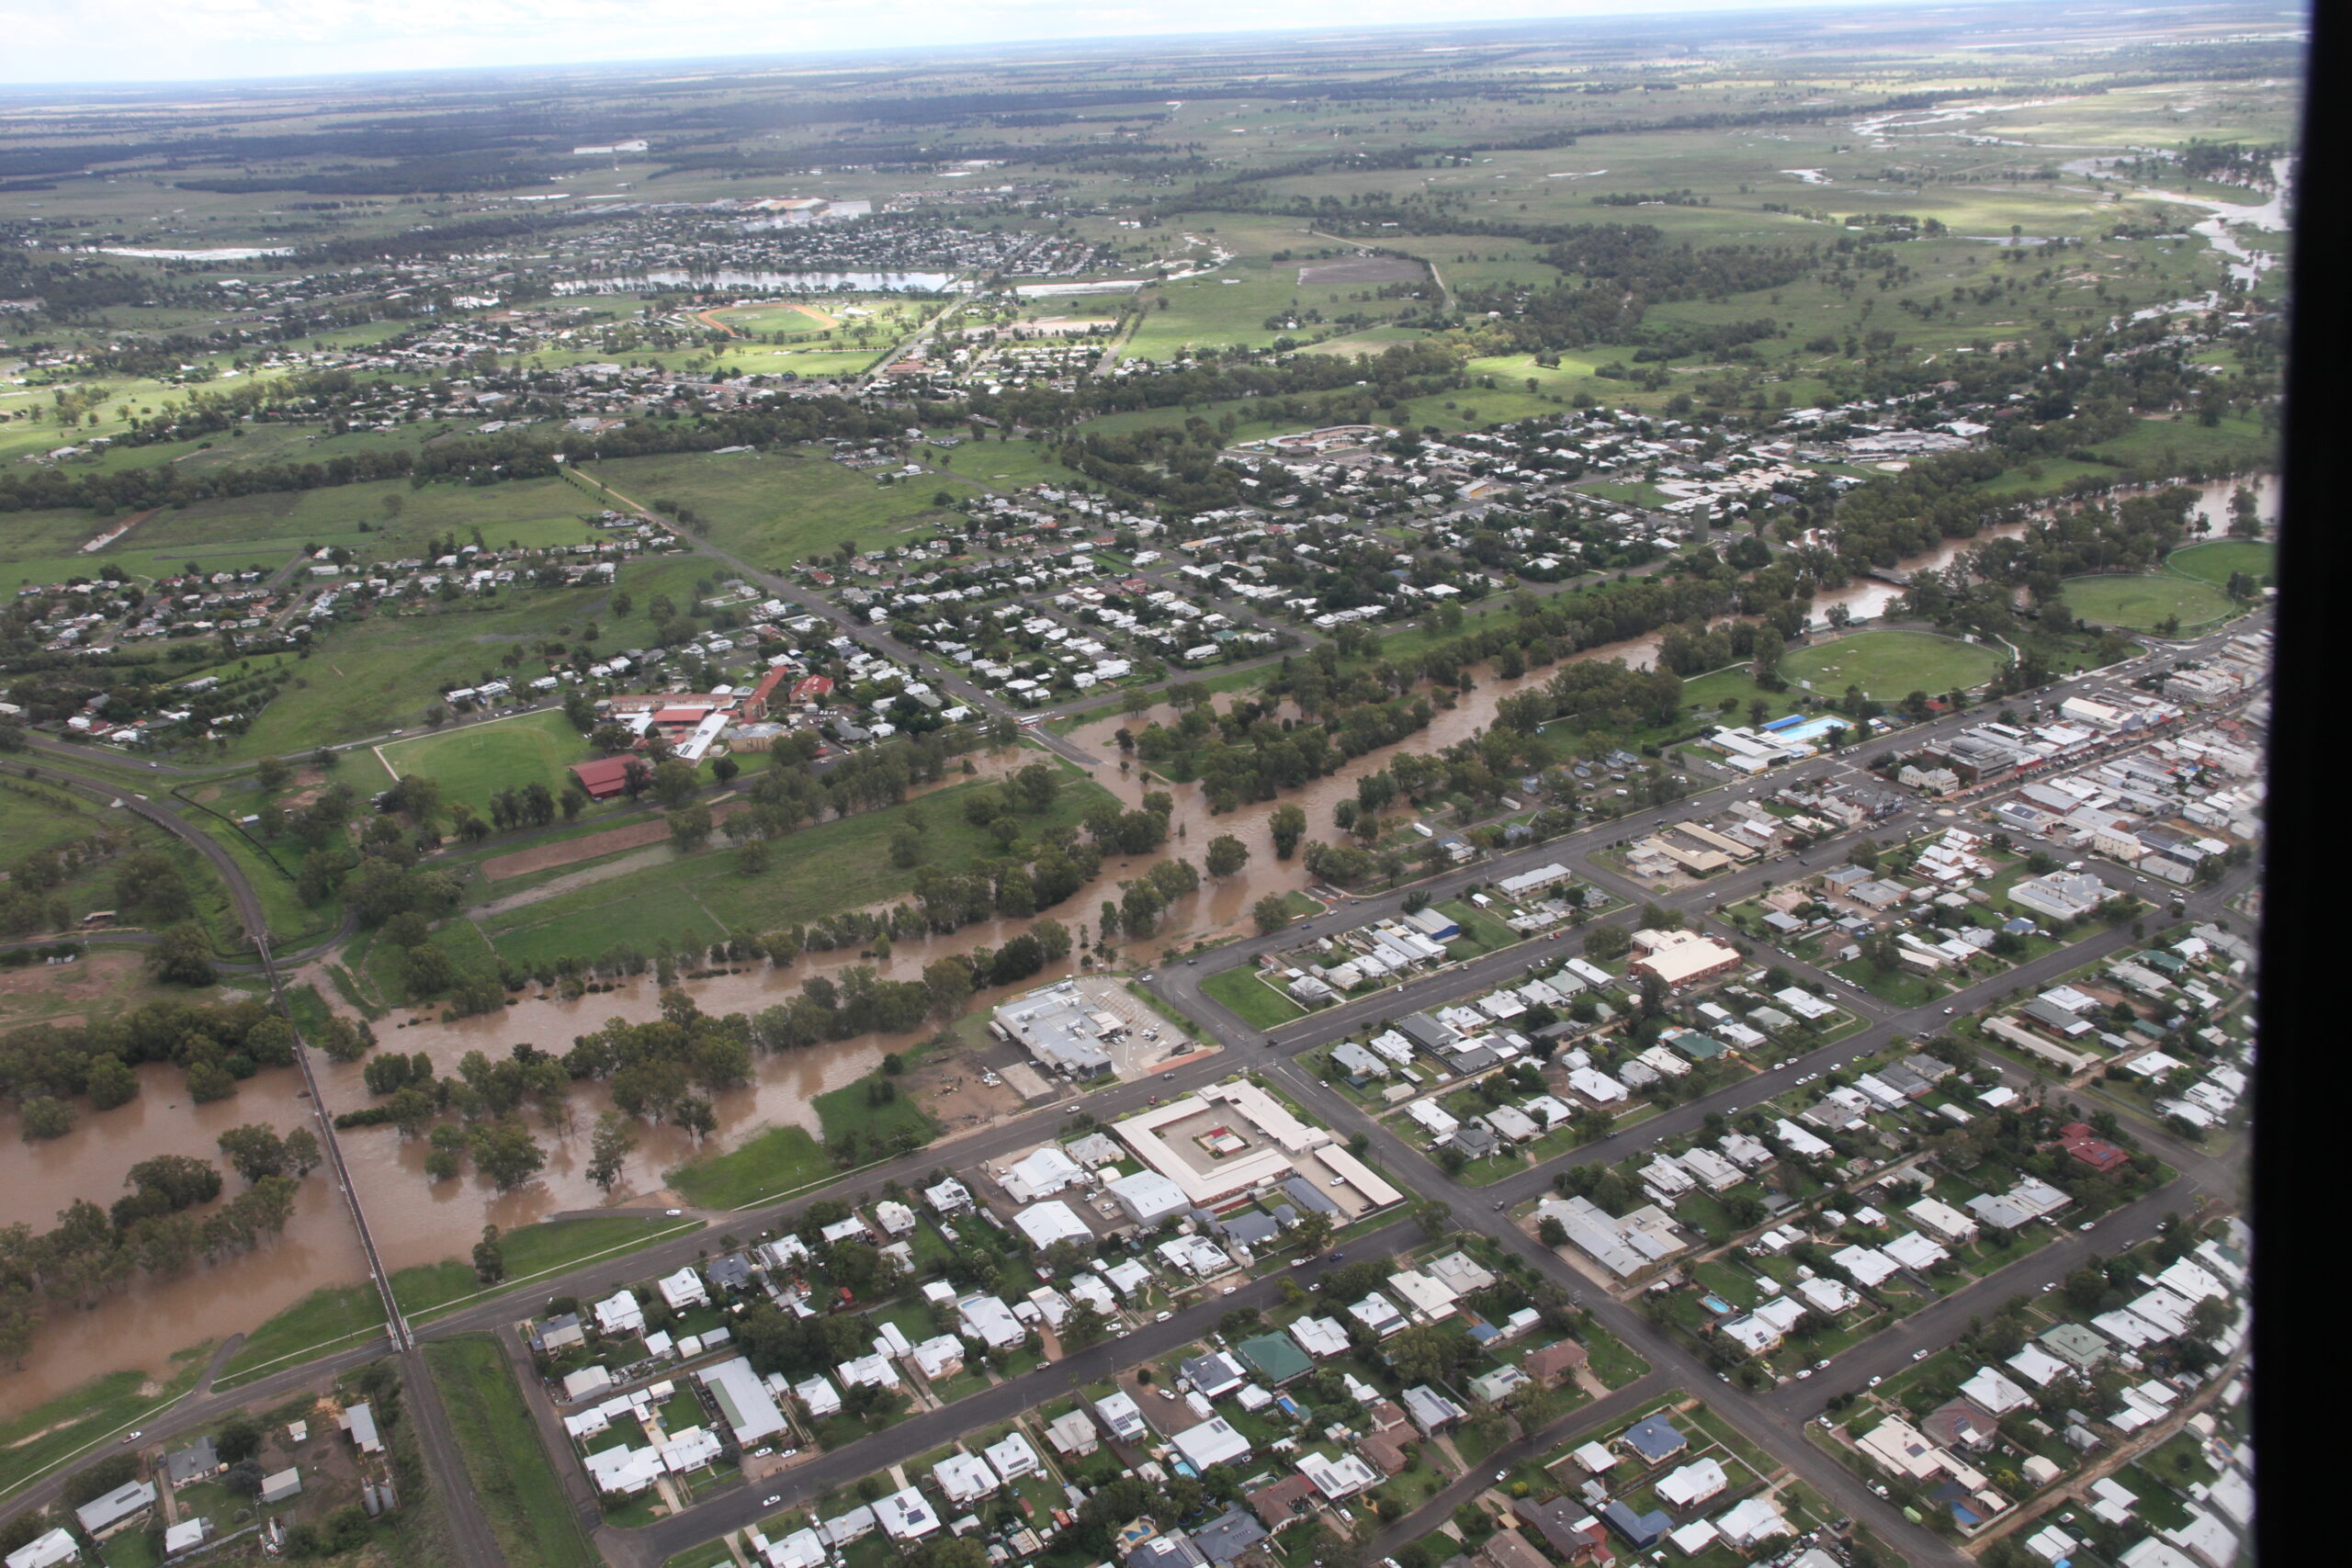 The swollen creek pictured from above on Friday afternoon.